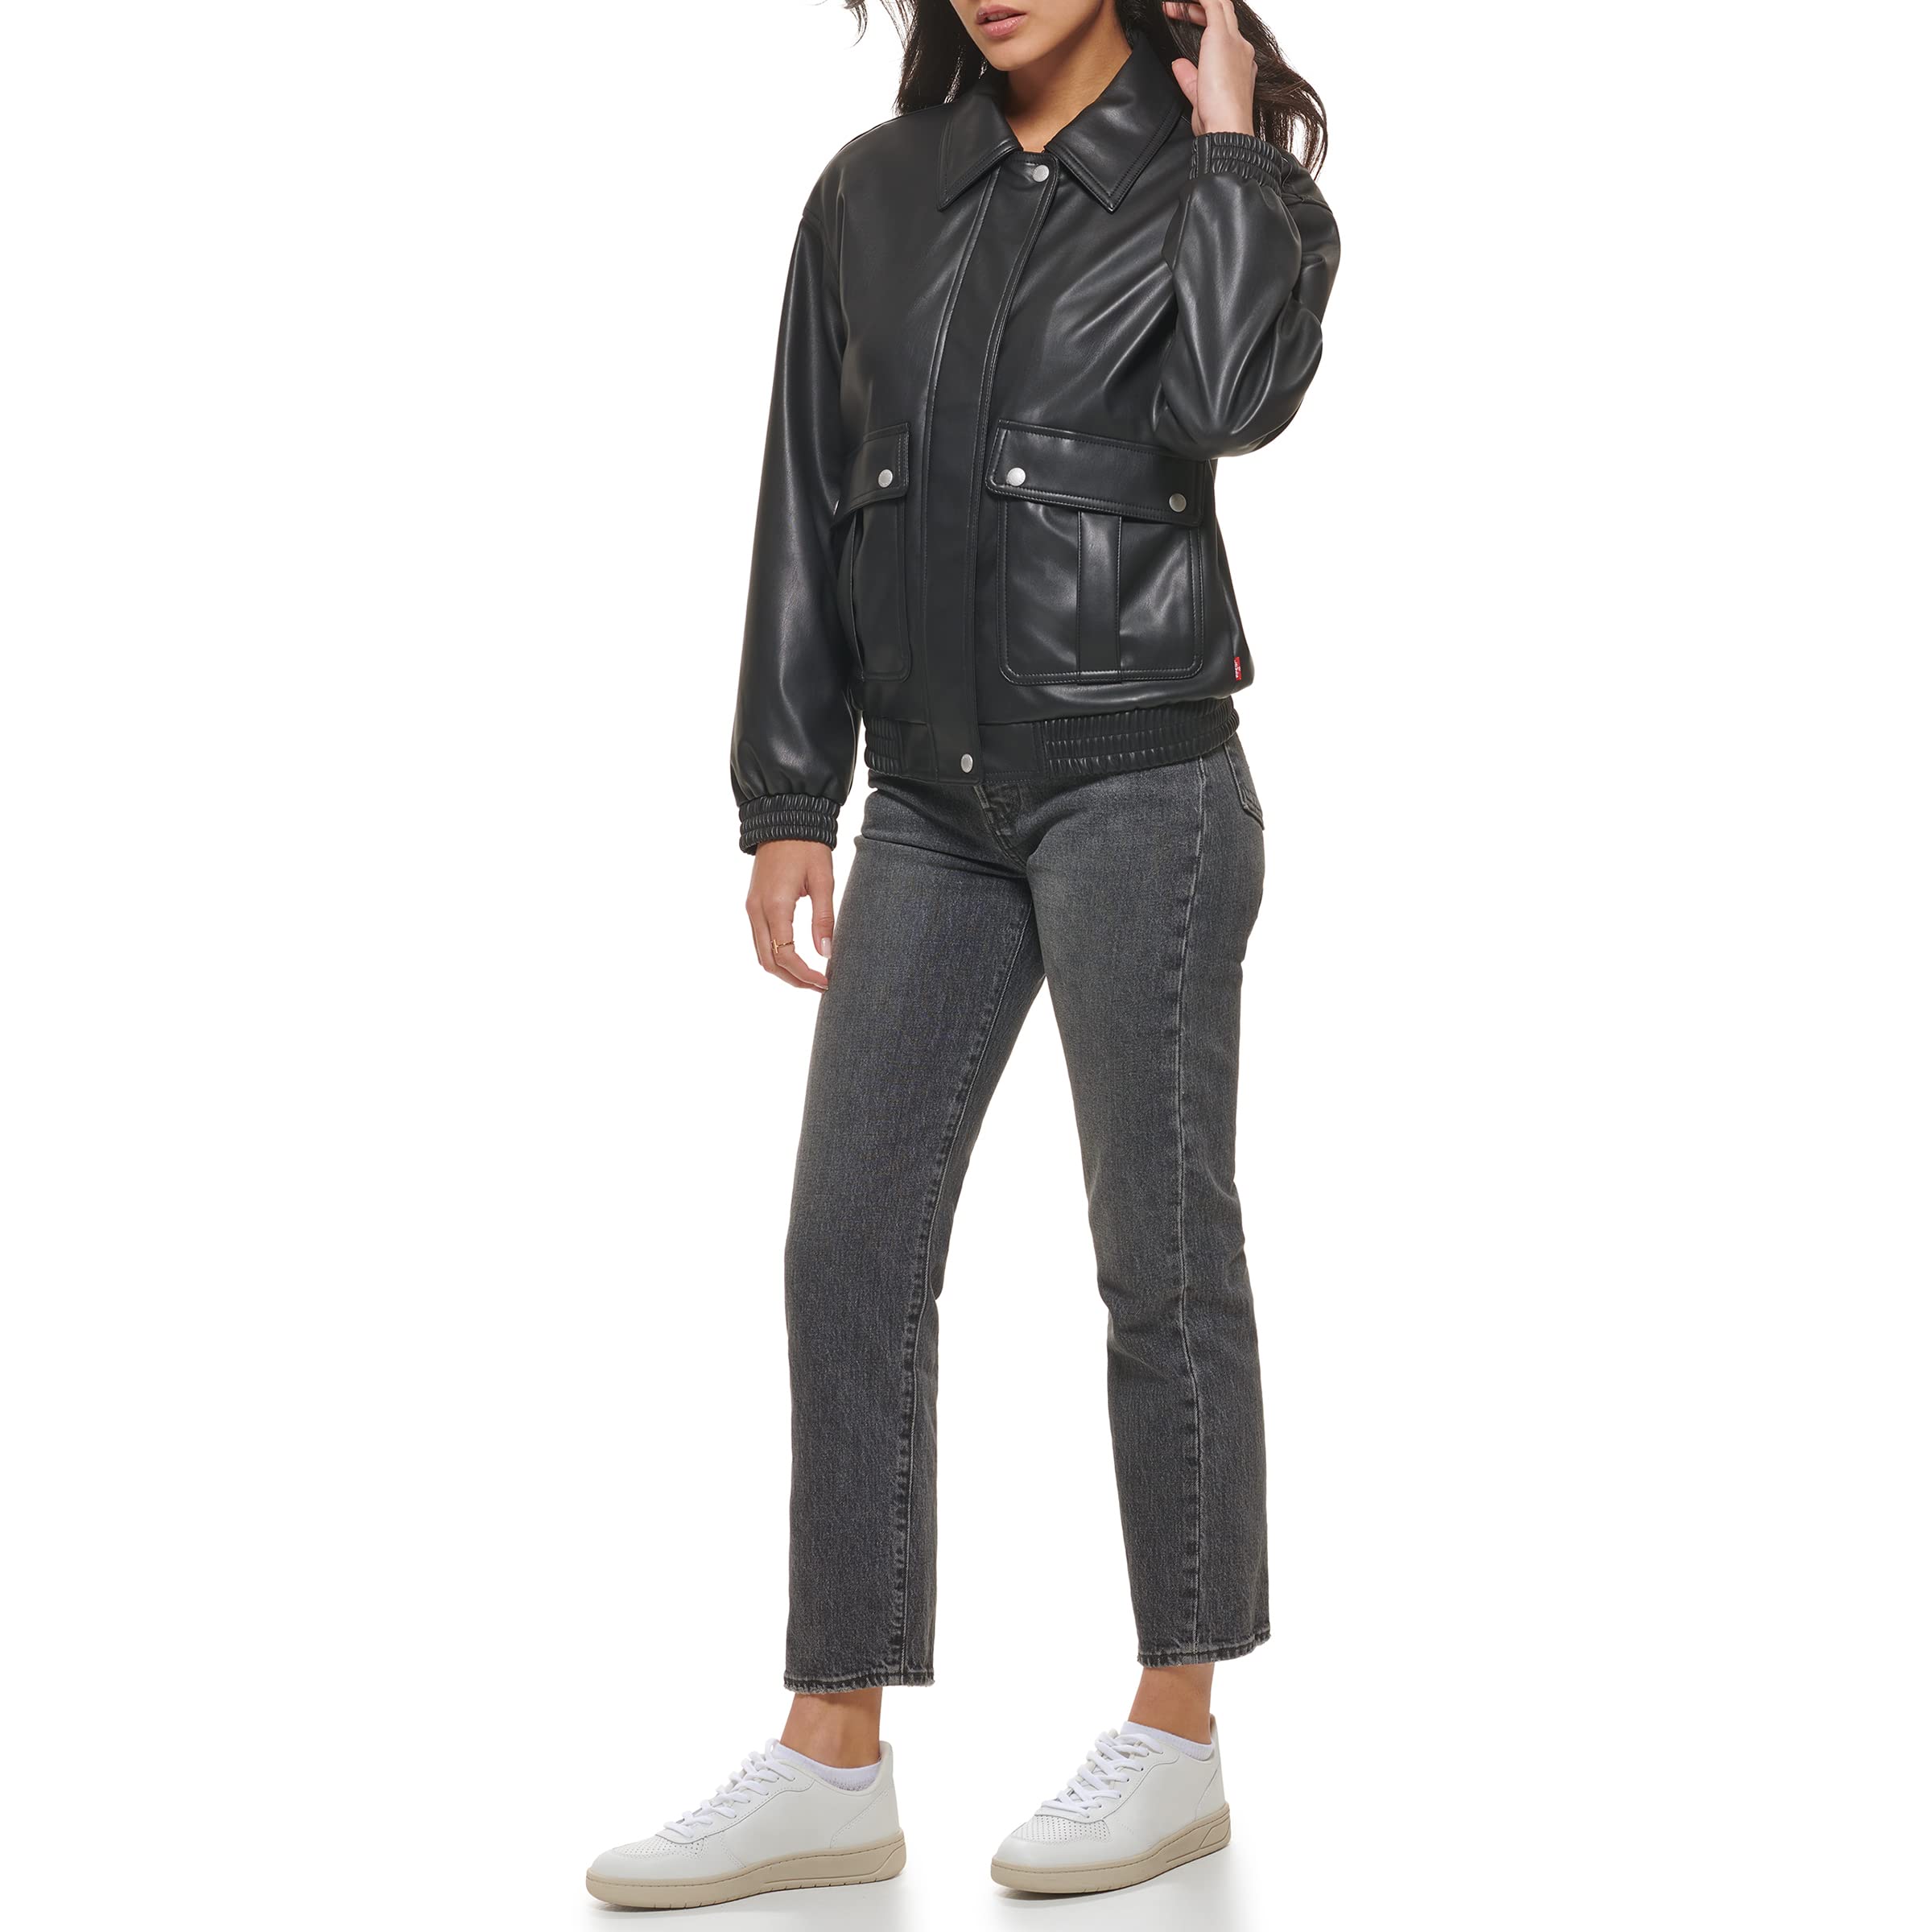 Levi's Women's Faux Leather Lightweight Dad Bomber Jacket